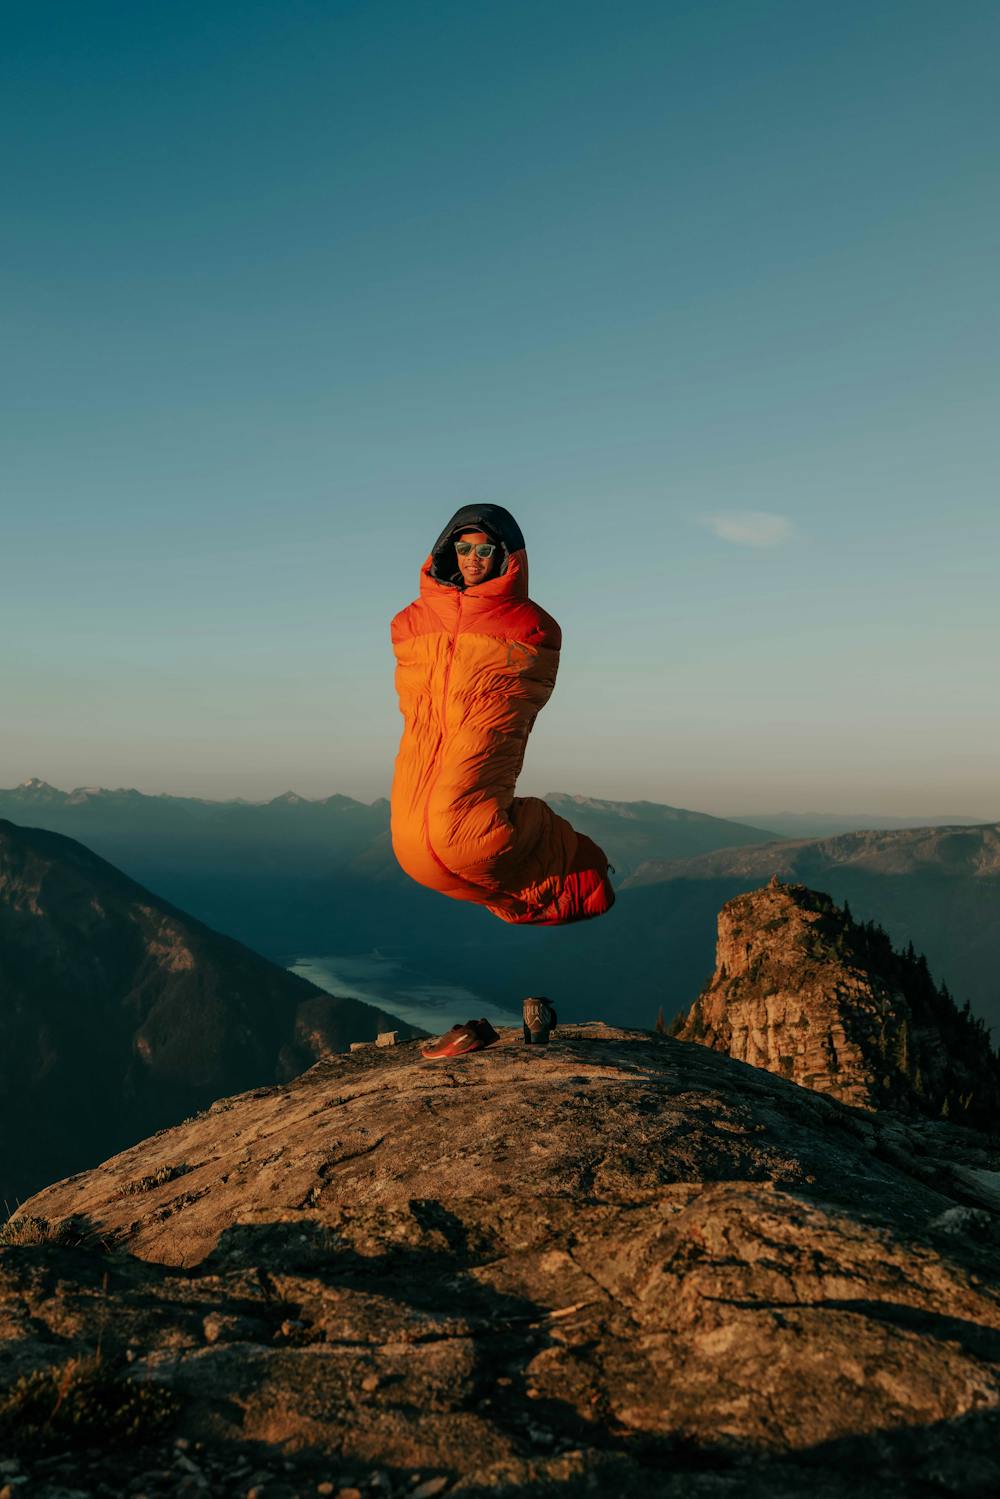 Great place to watch the sunrise outside in your sleeping bag